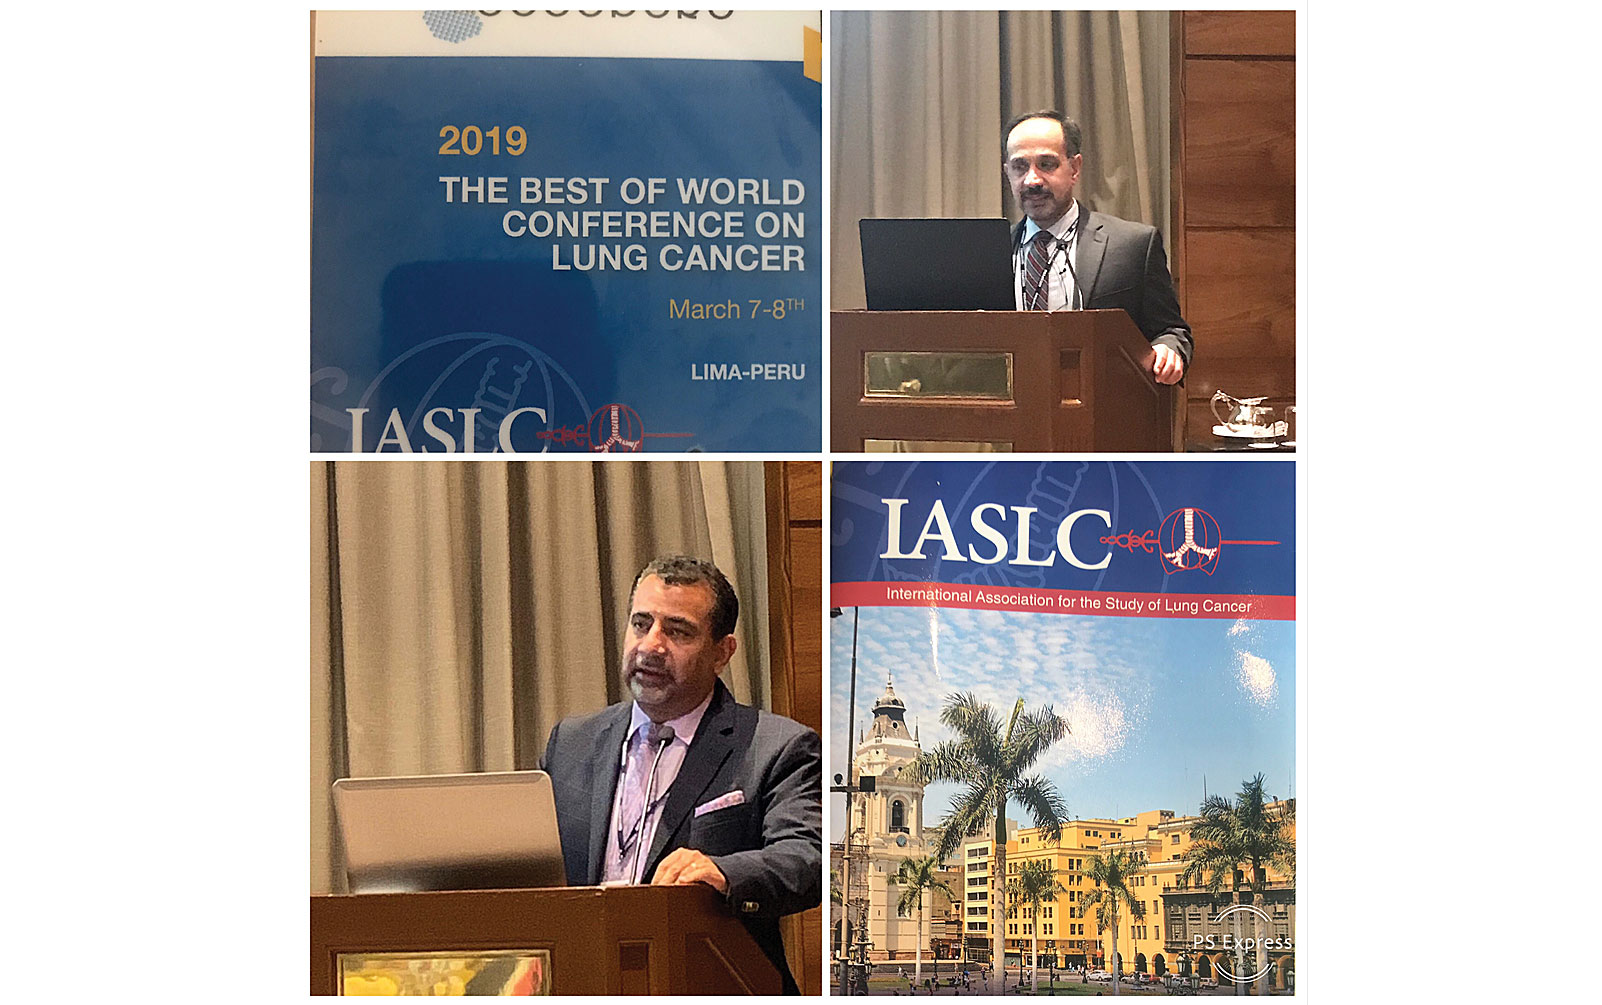 2019 IASLC Best of the World Lung Cancer Conference Results in New Virtual Collaboration